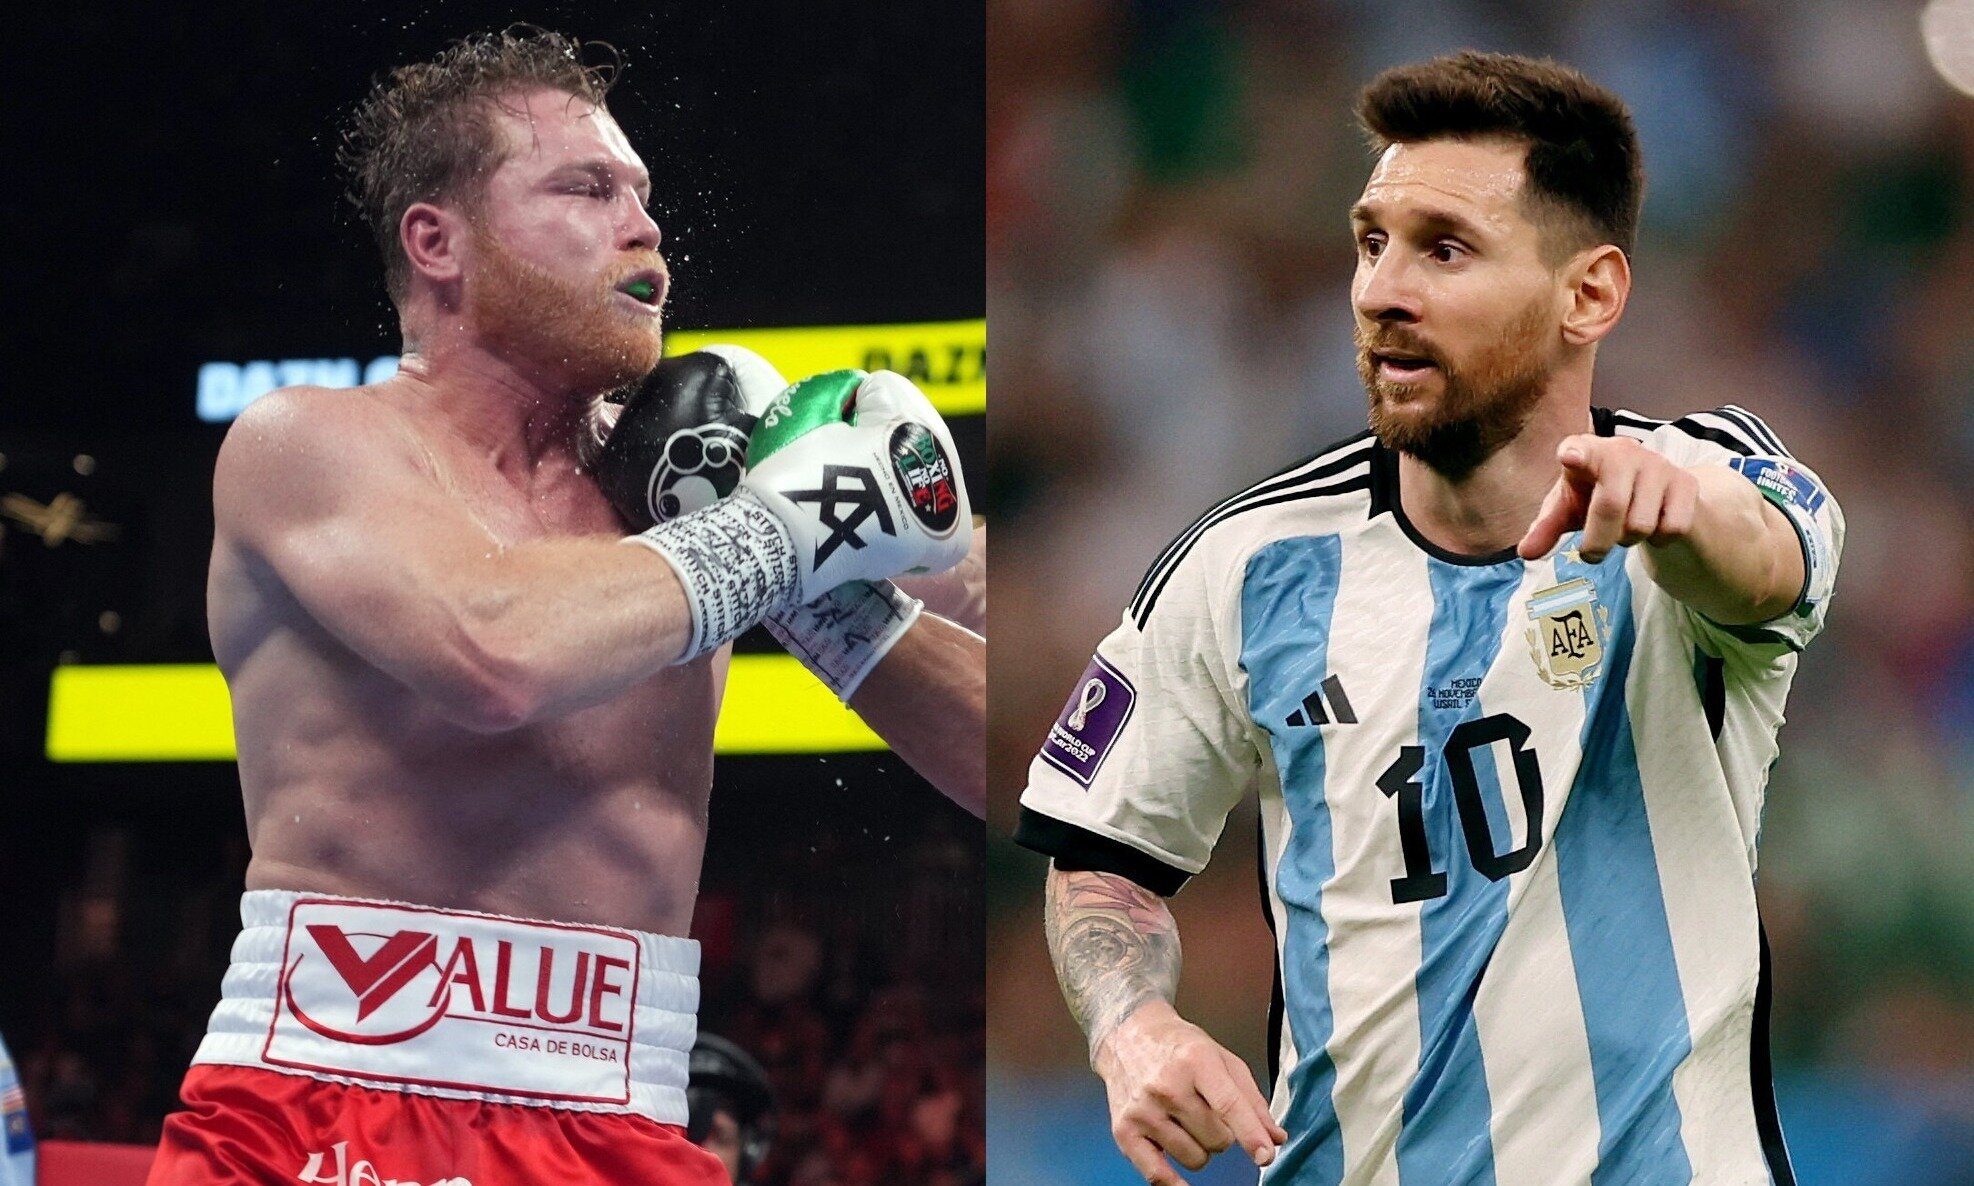 Canelo says he got carried away, apologizes to Messi after threat